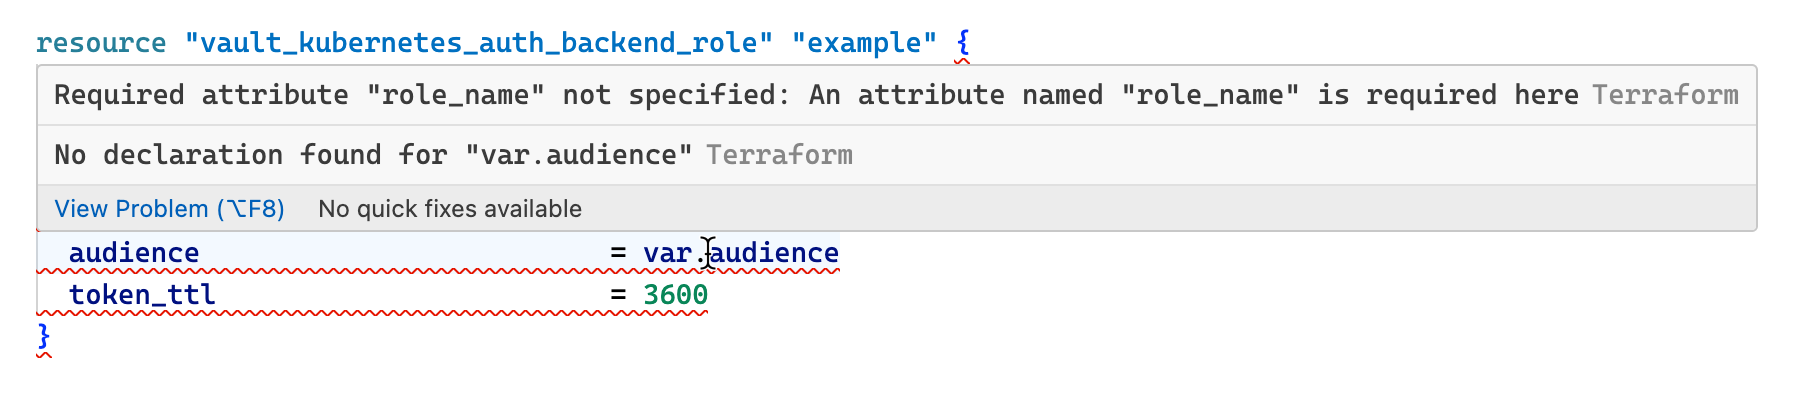 Validation errors (underlined in red) are immediately identified within the editor, without context switching.